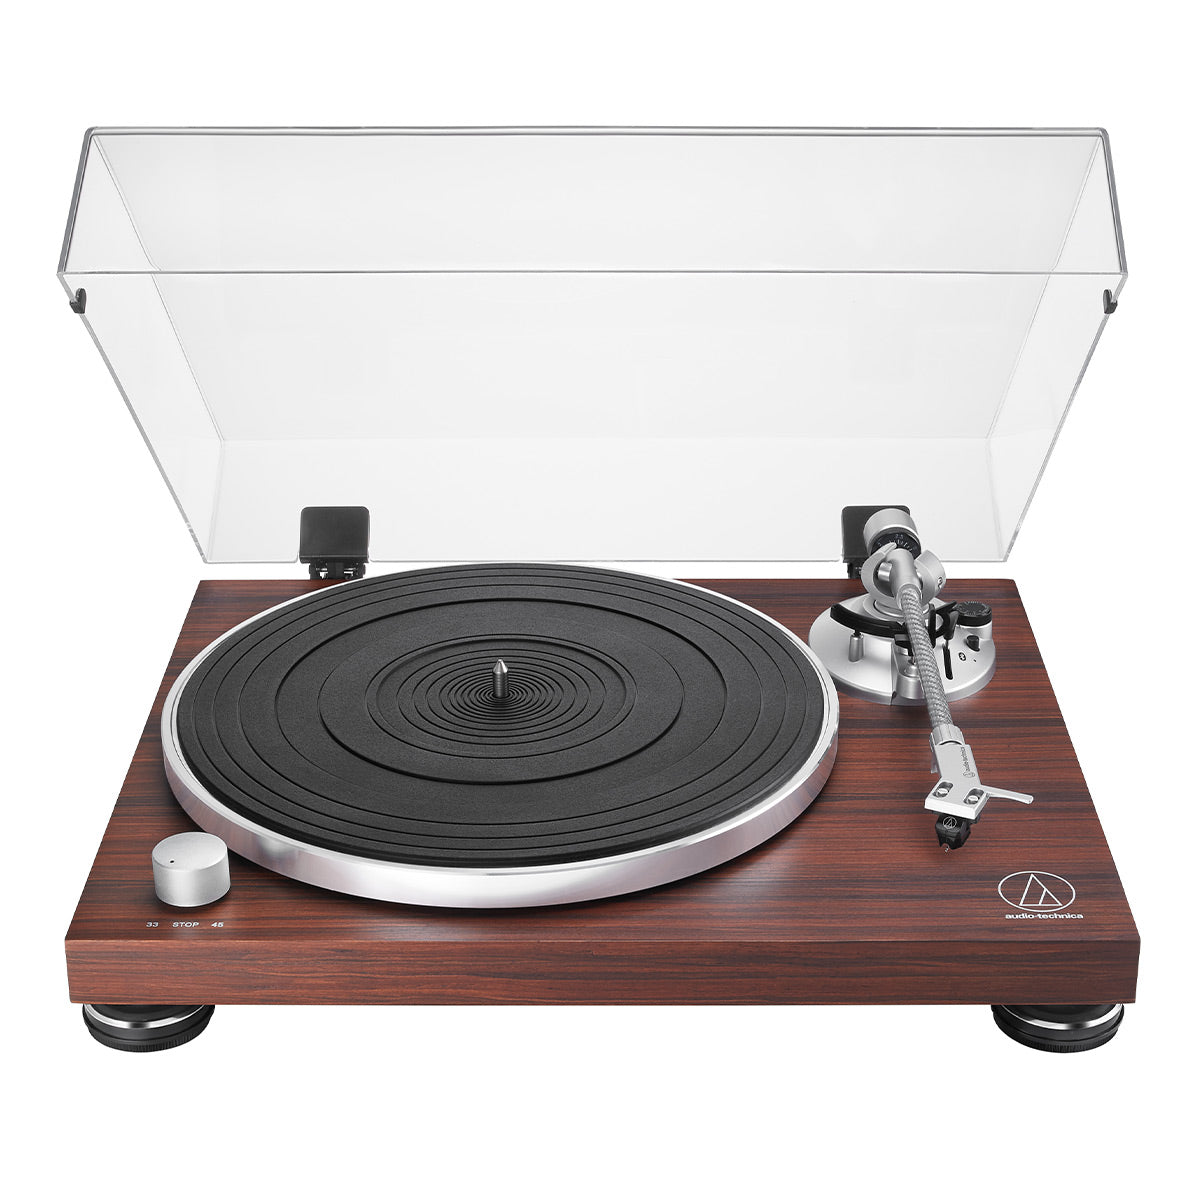 AudioTechnica AT-LPW50BT-RW Wireless Belt-Drive Turntable with Bluetooth (Rosewood)